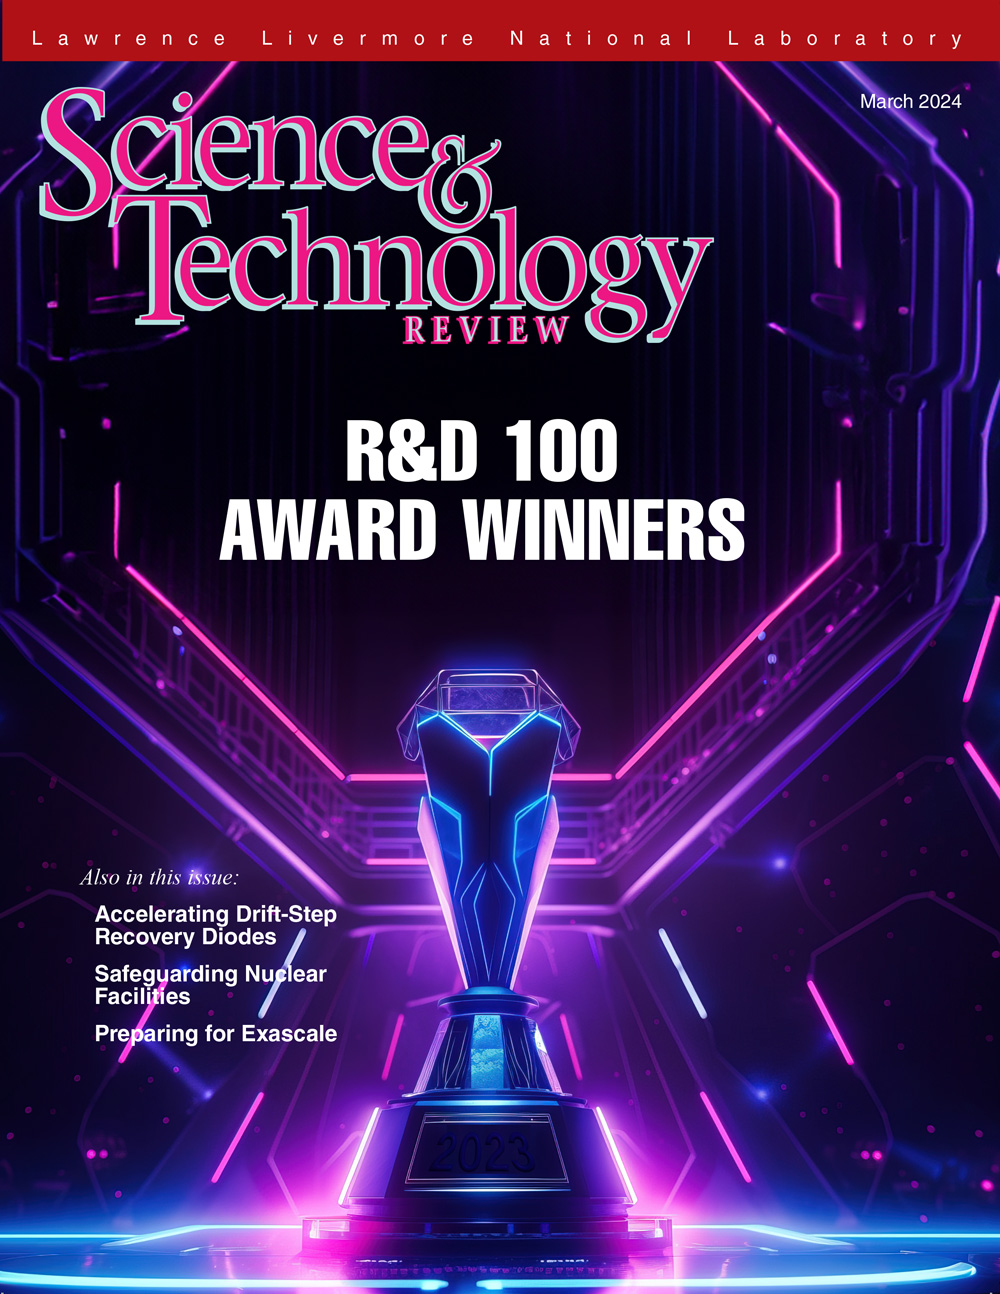 March 2024 Cover Issue of S&TR